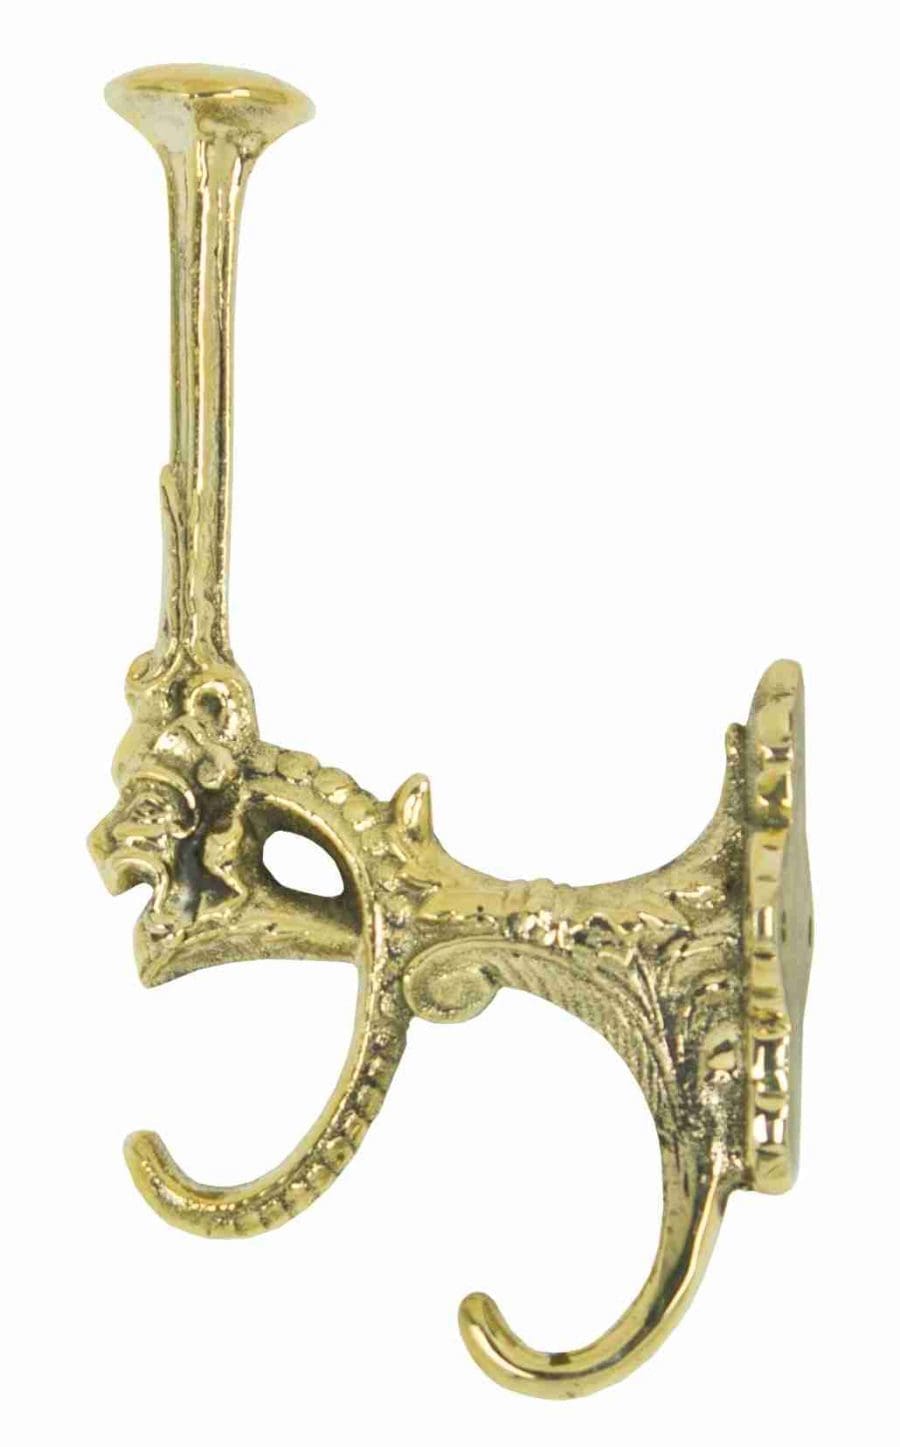 SOLID CAST BRASS DRAGON HALL TREE HOOK 7 INCHES TALL UDUH-440